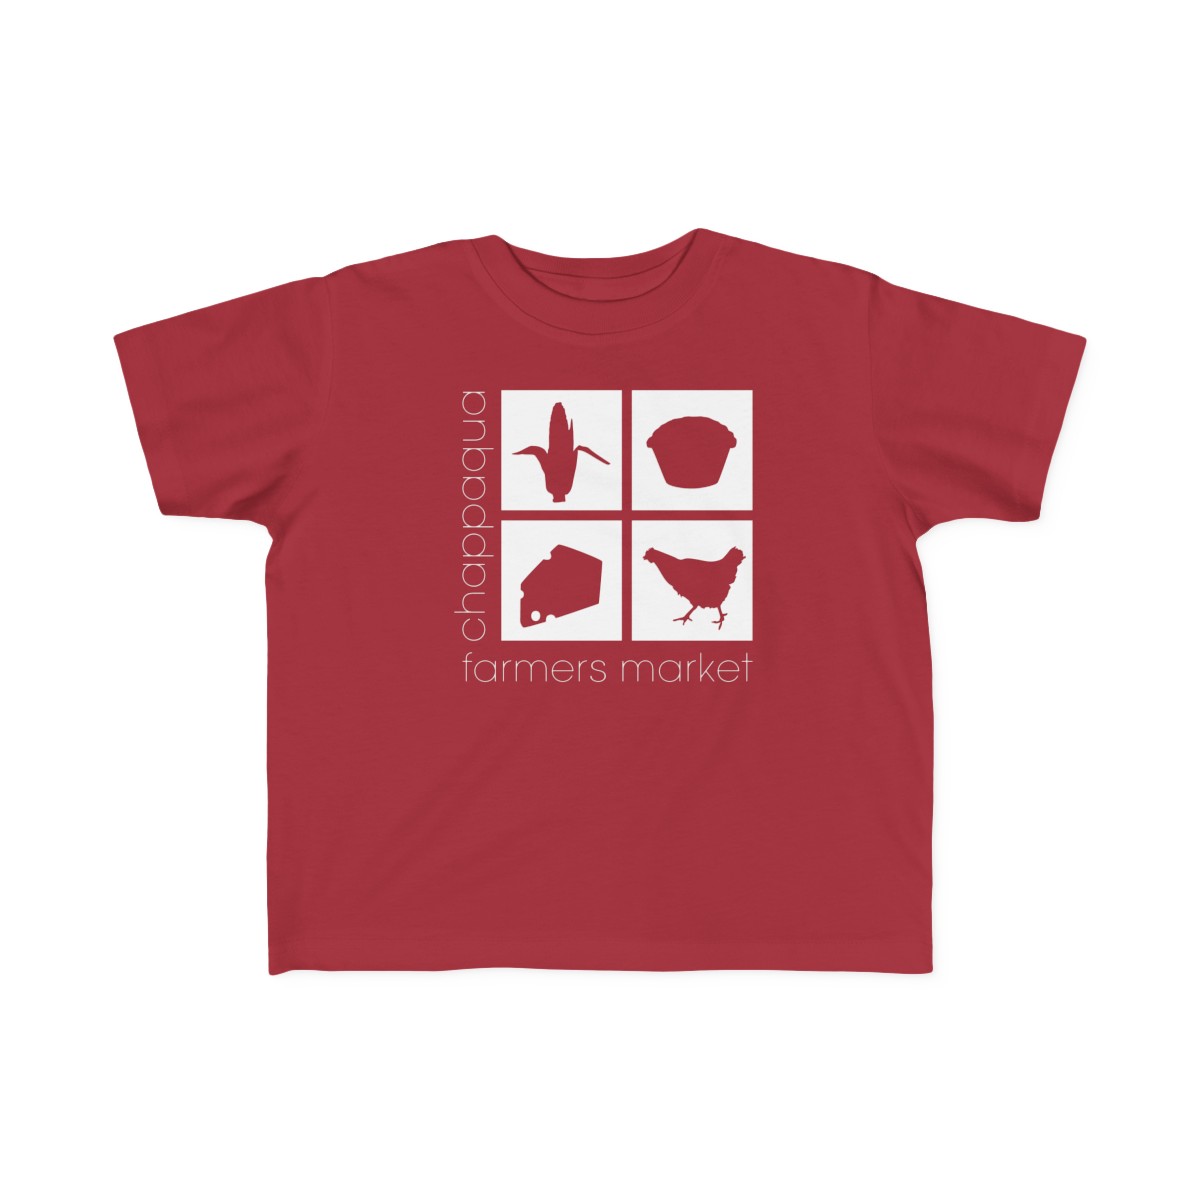 Toddler's Fine Jersey Tee with CFM logo product thumbnail image